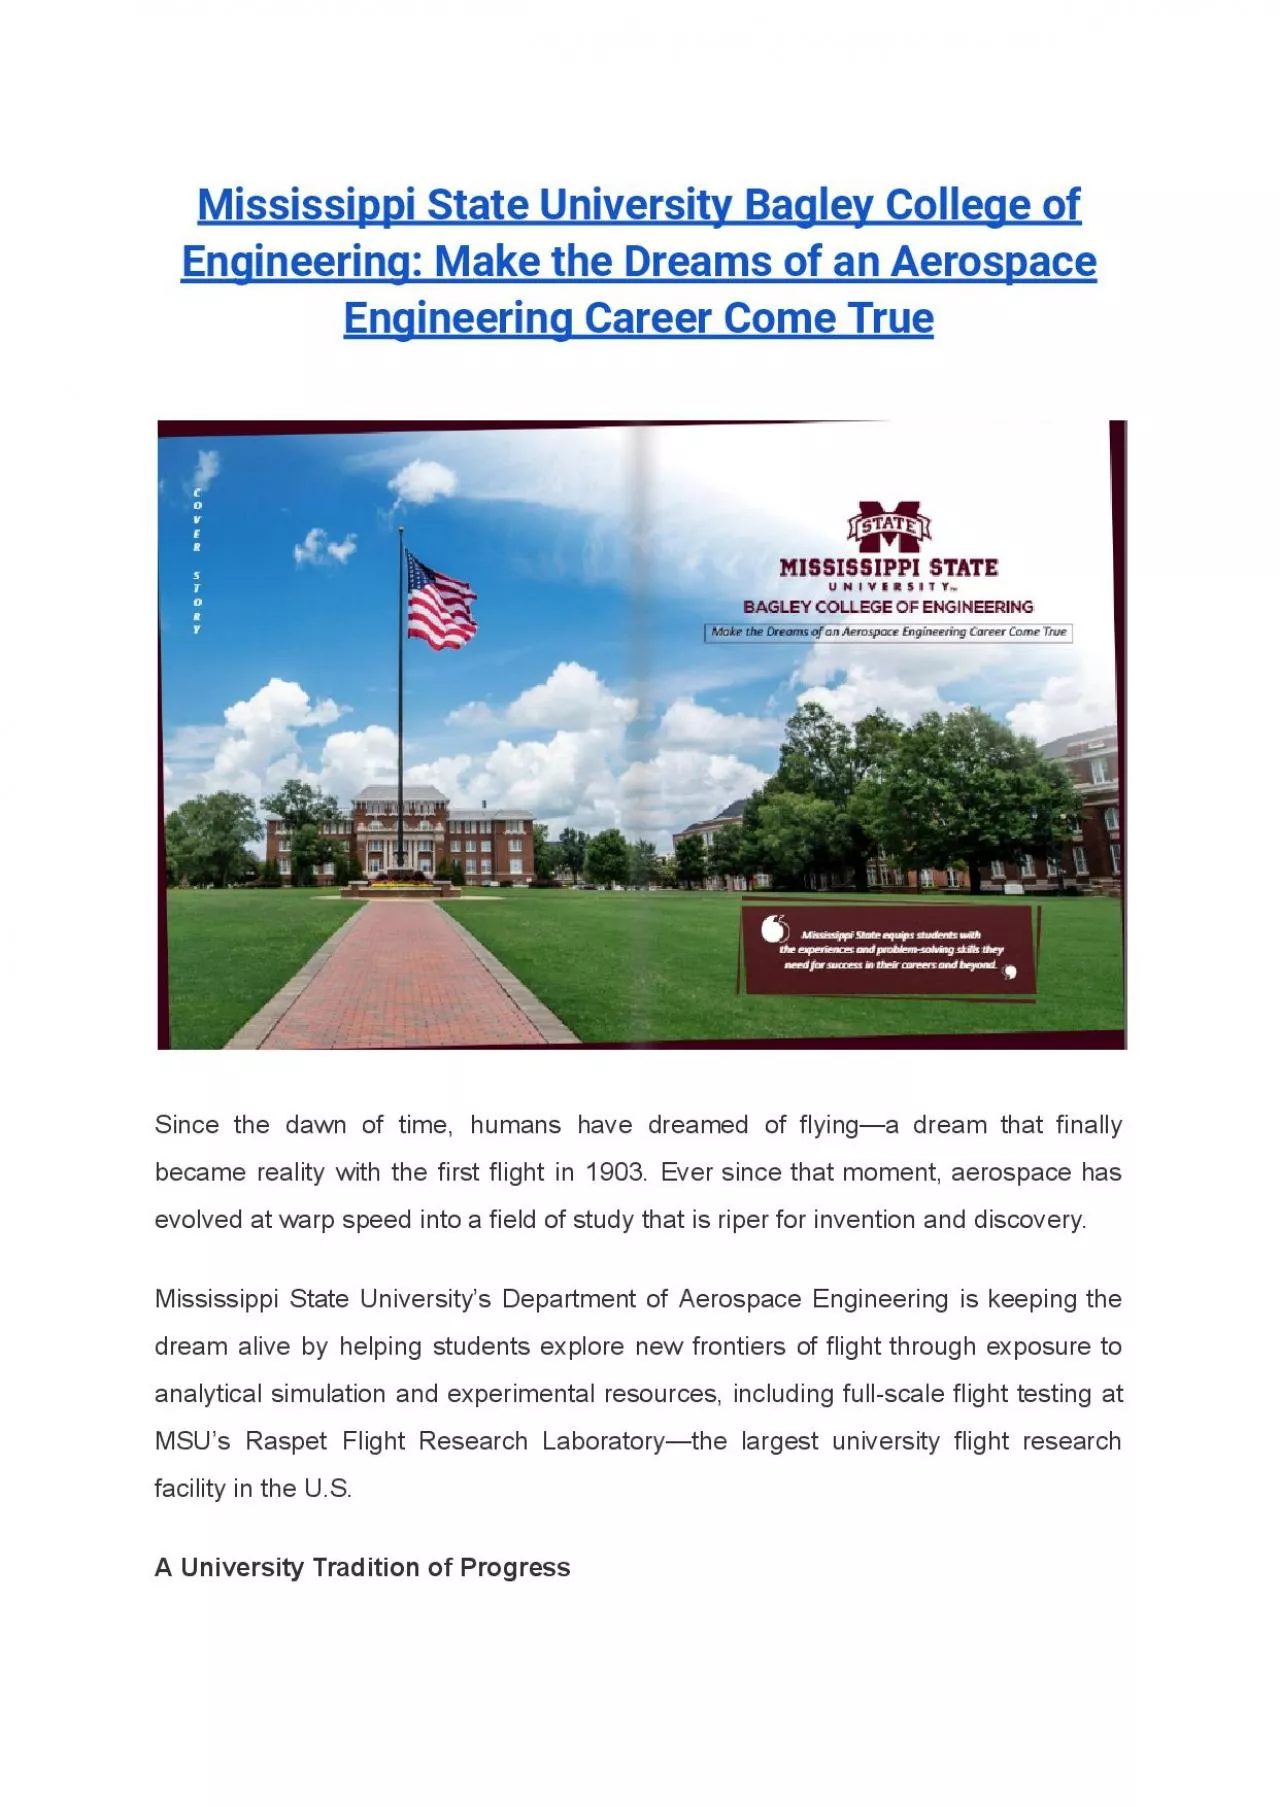 Mississippi State University Bagley College of Engineering: Make the Dreams of an Aerospace